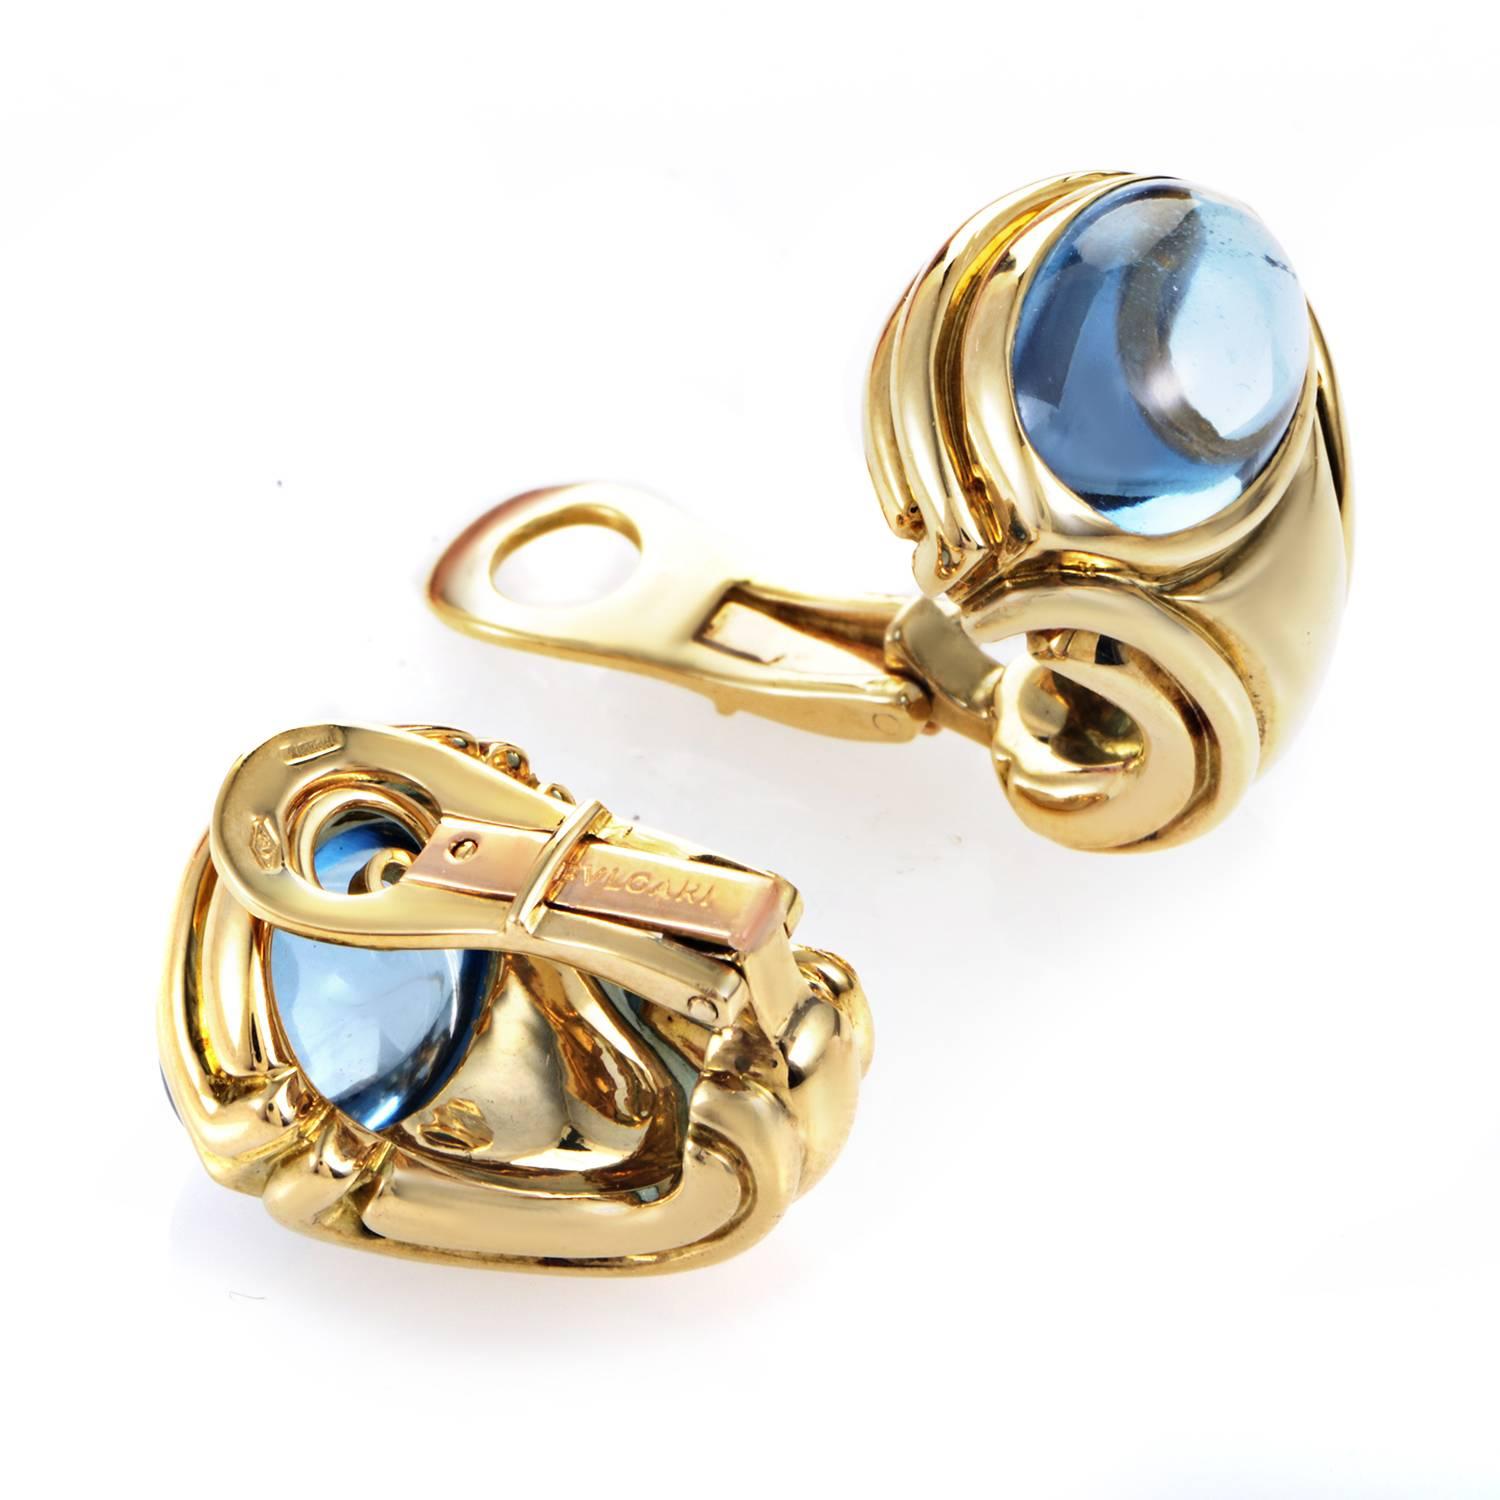 The magnificent reflective surface and splendid nuance of astonishing aquamarine stones create a fabulous sight in these gorgeous 18K yellow gold earrings from Bulgari that exude sophistication and taste.
Included Items: Manufacturer's Box